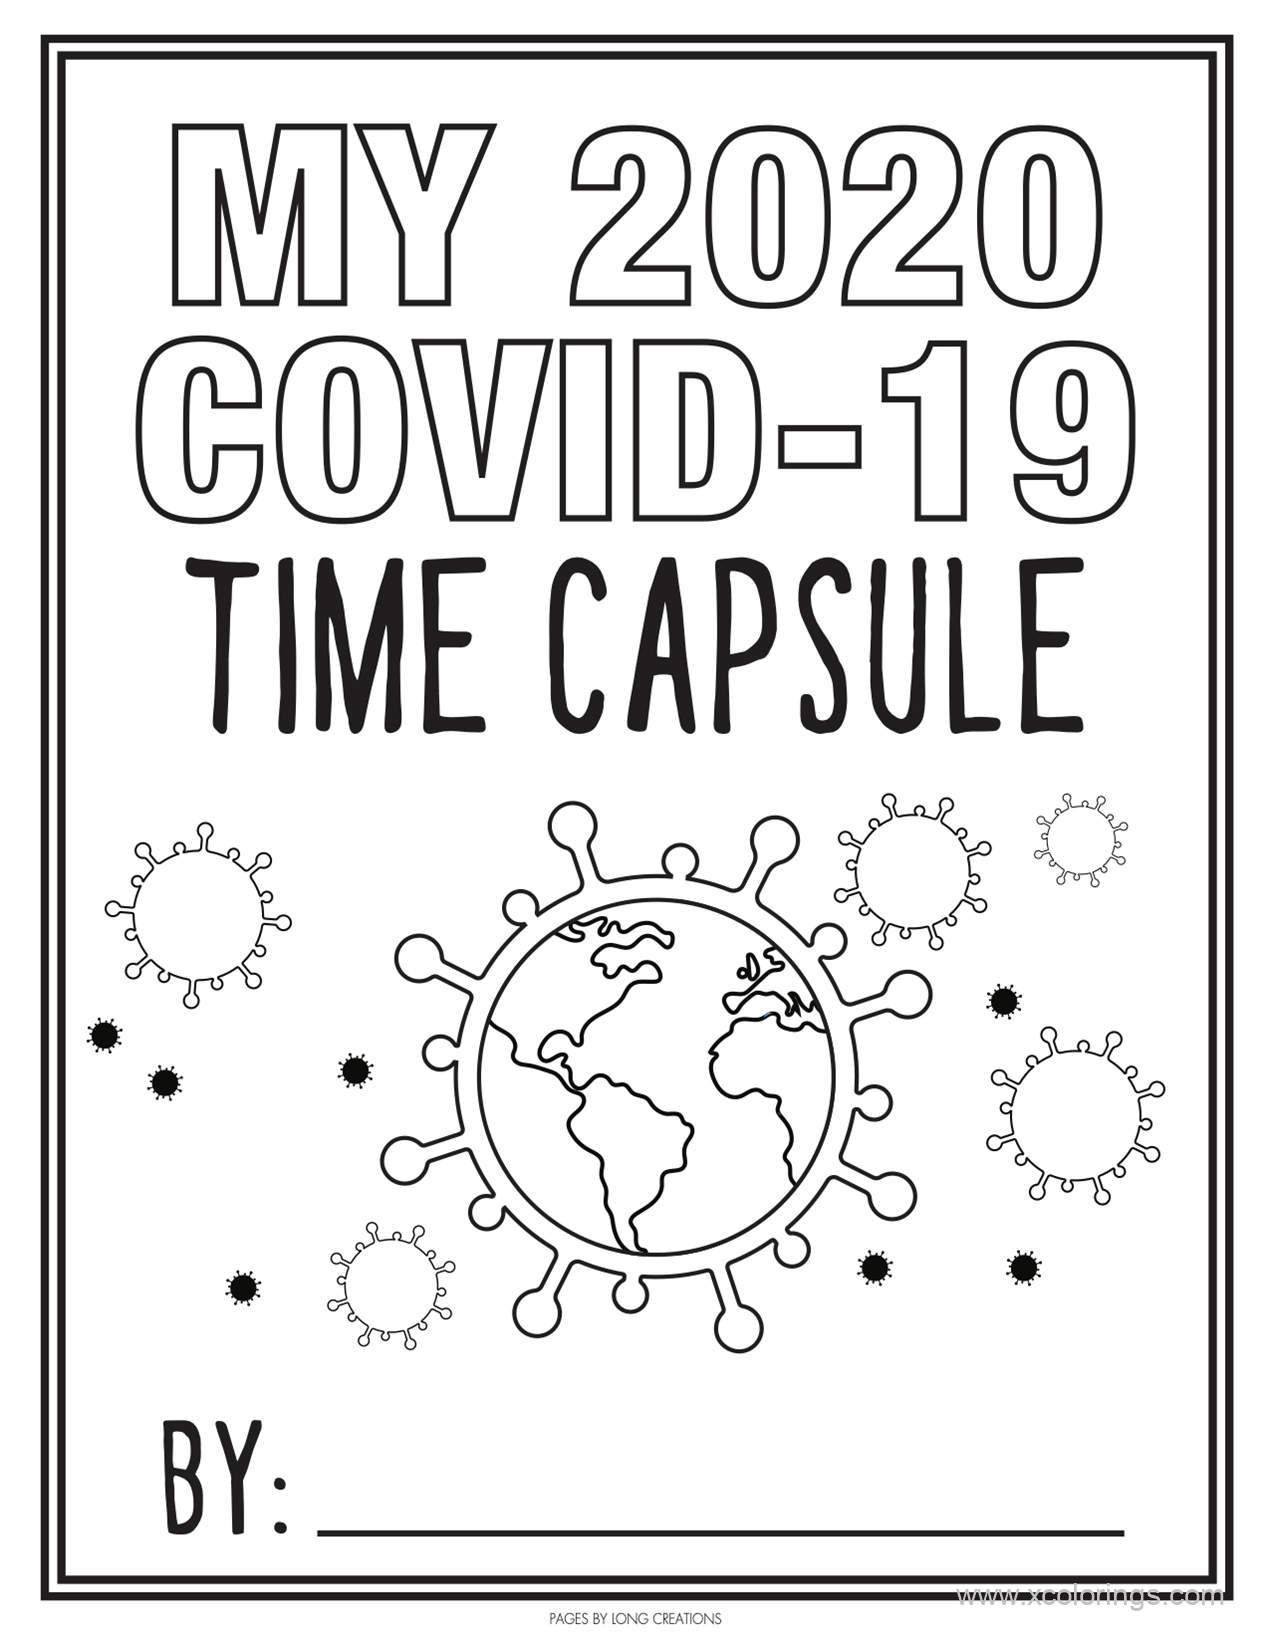 Free Coronavirus Time Capsule Coloring Pages printable